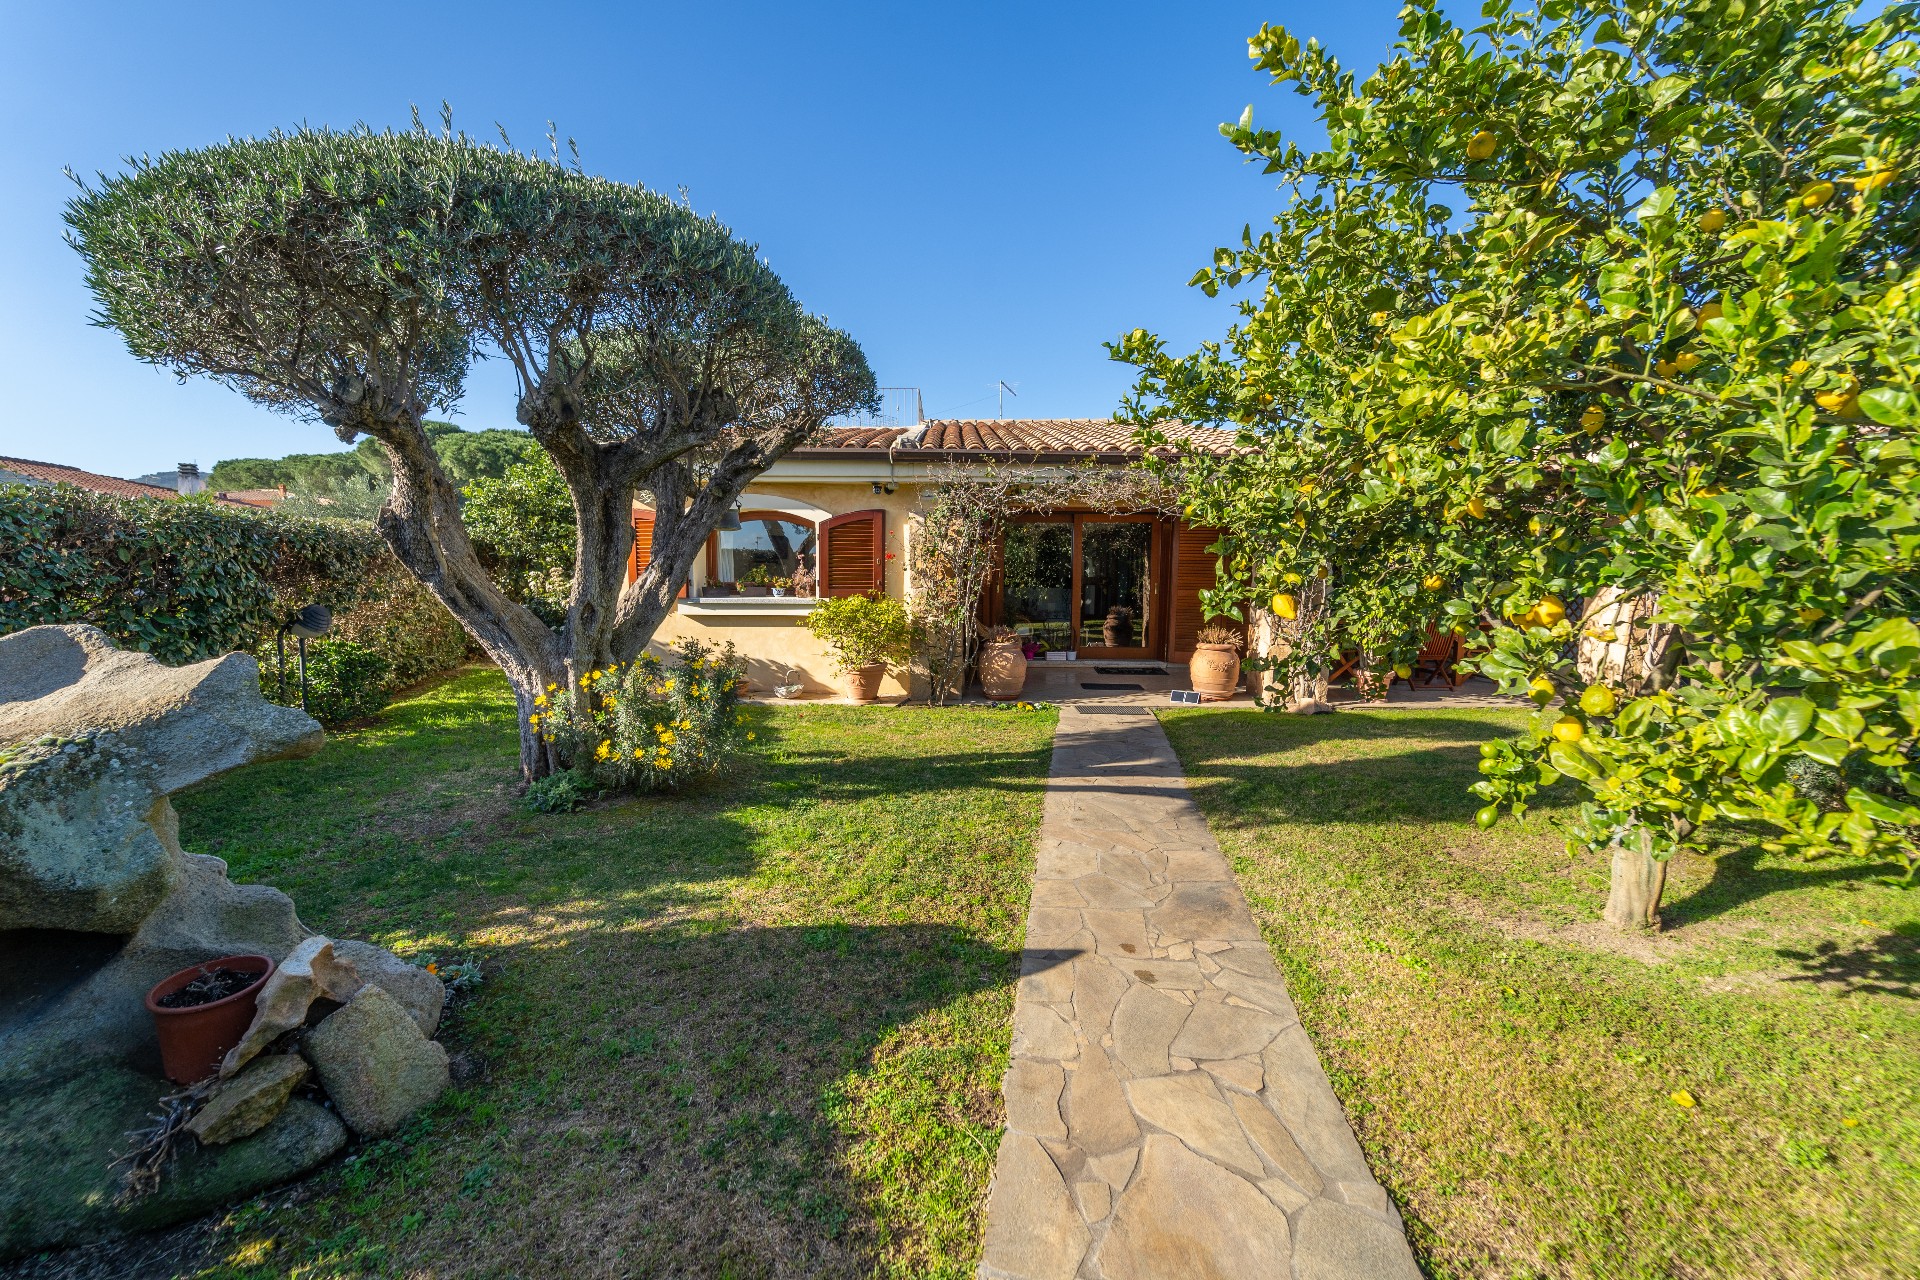 Villa with large, well-kept garden in Porto San paolo 